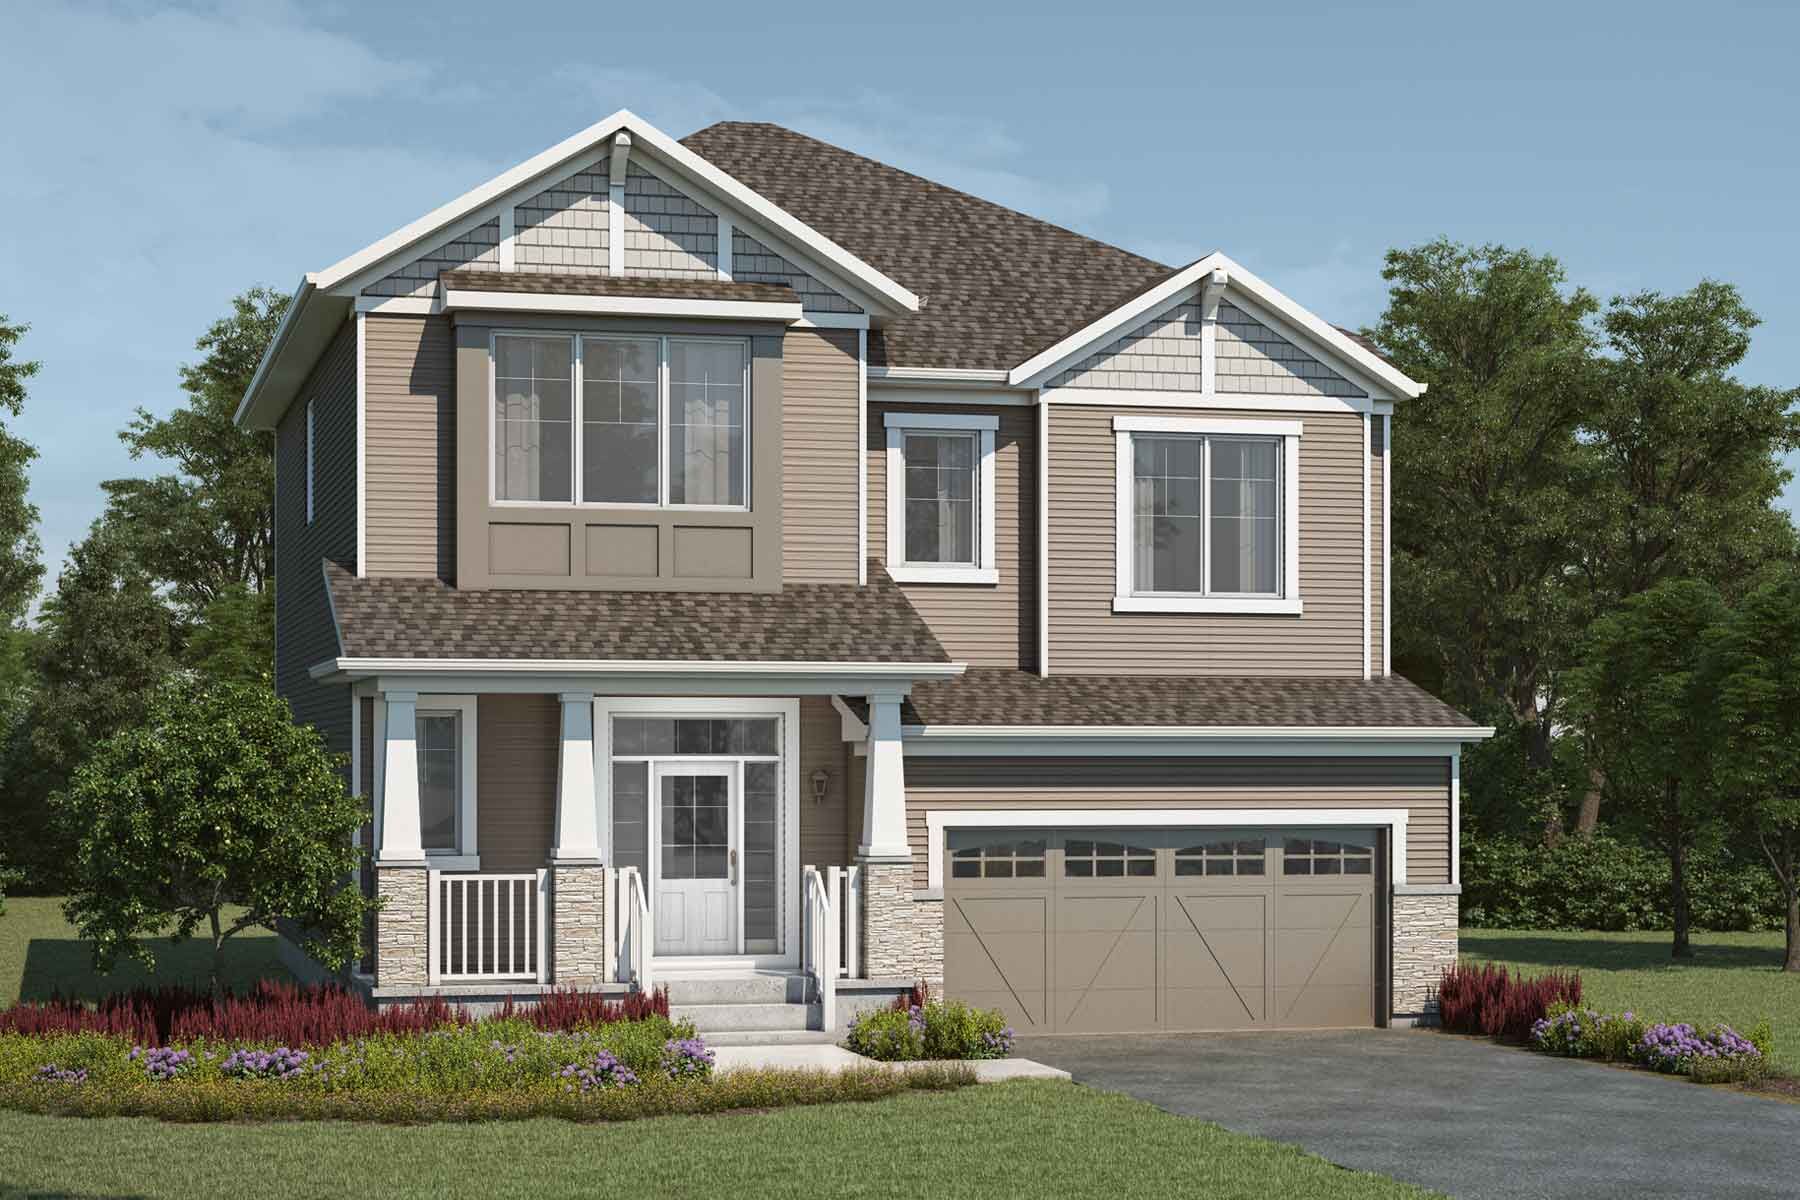 A Craftsman style single family home with a double car garage.